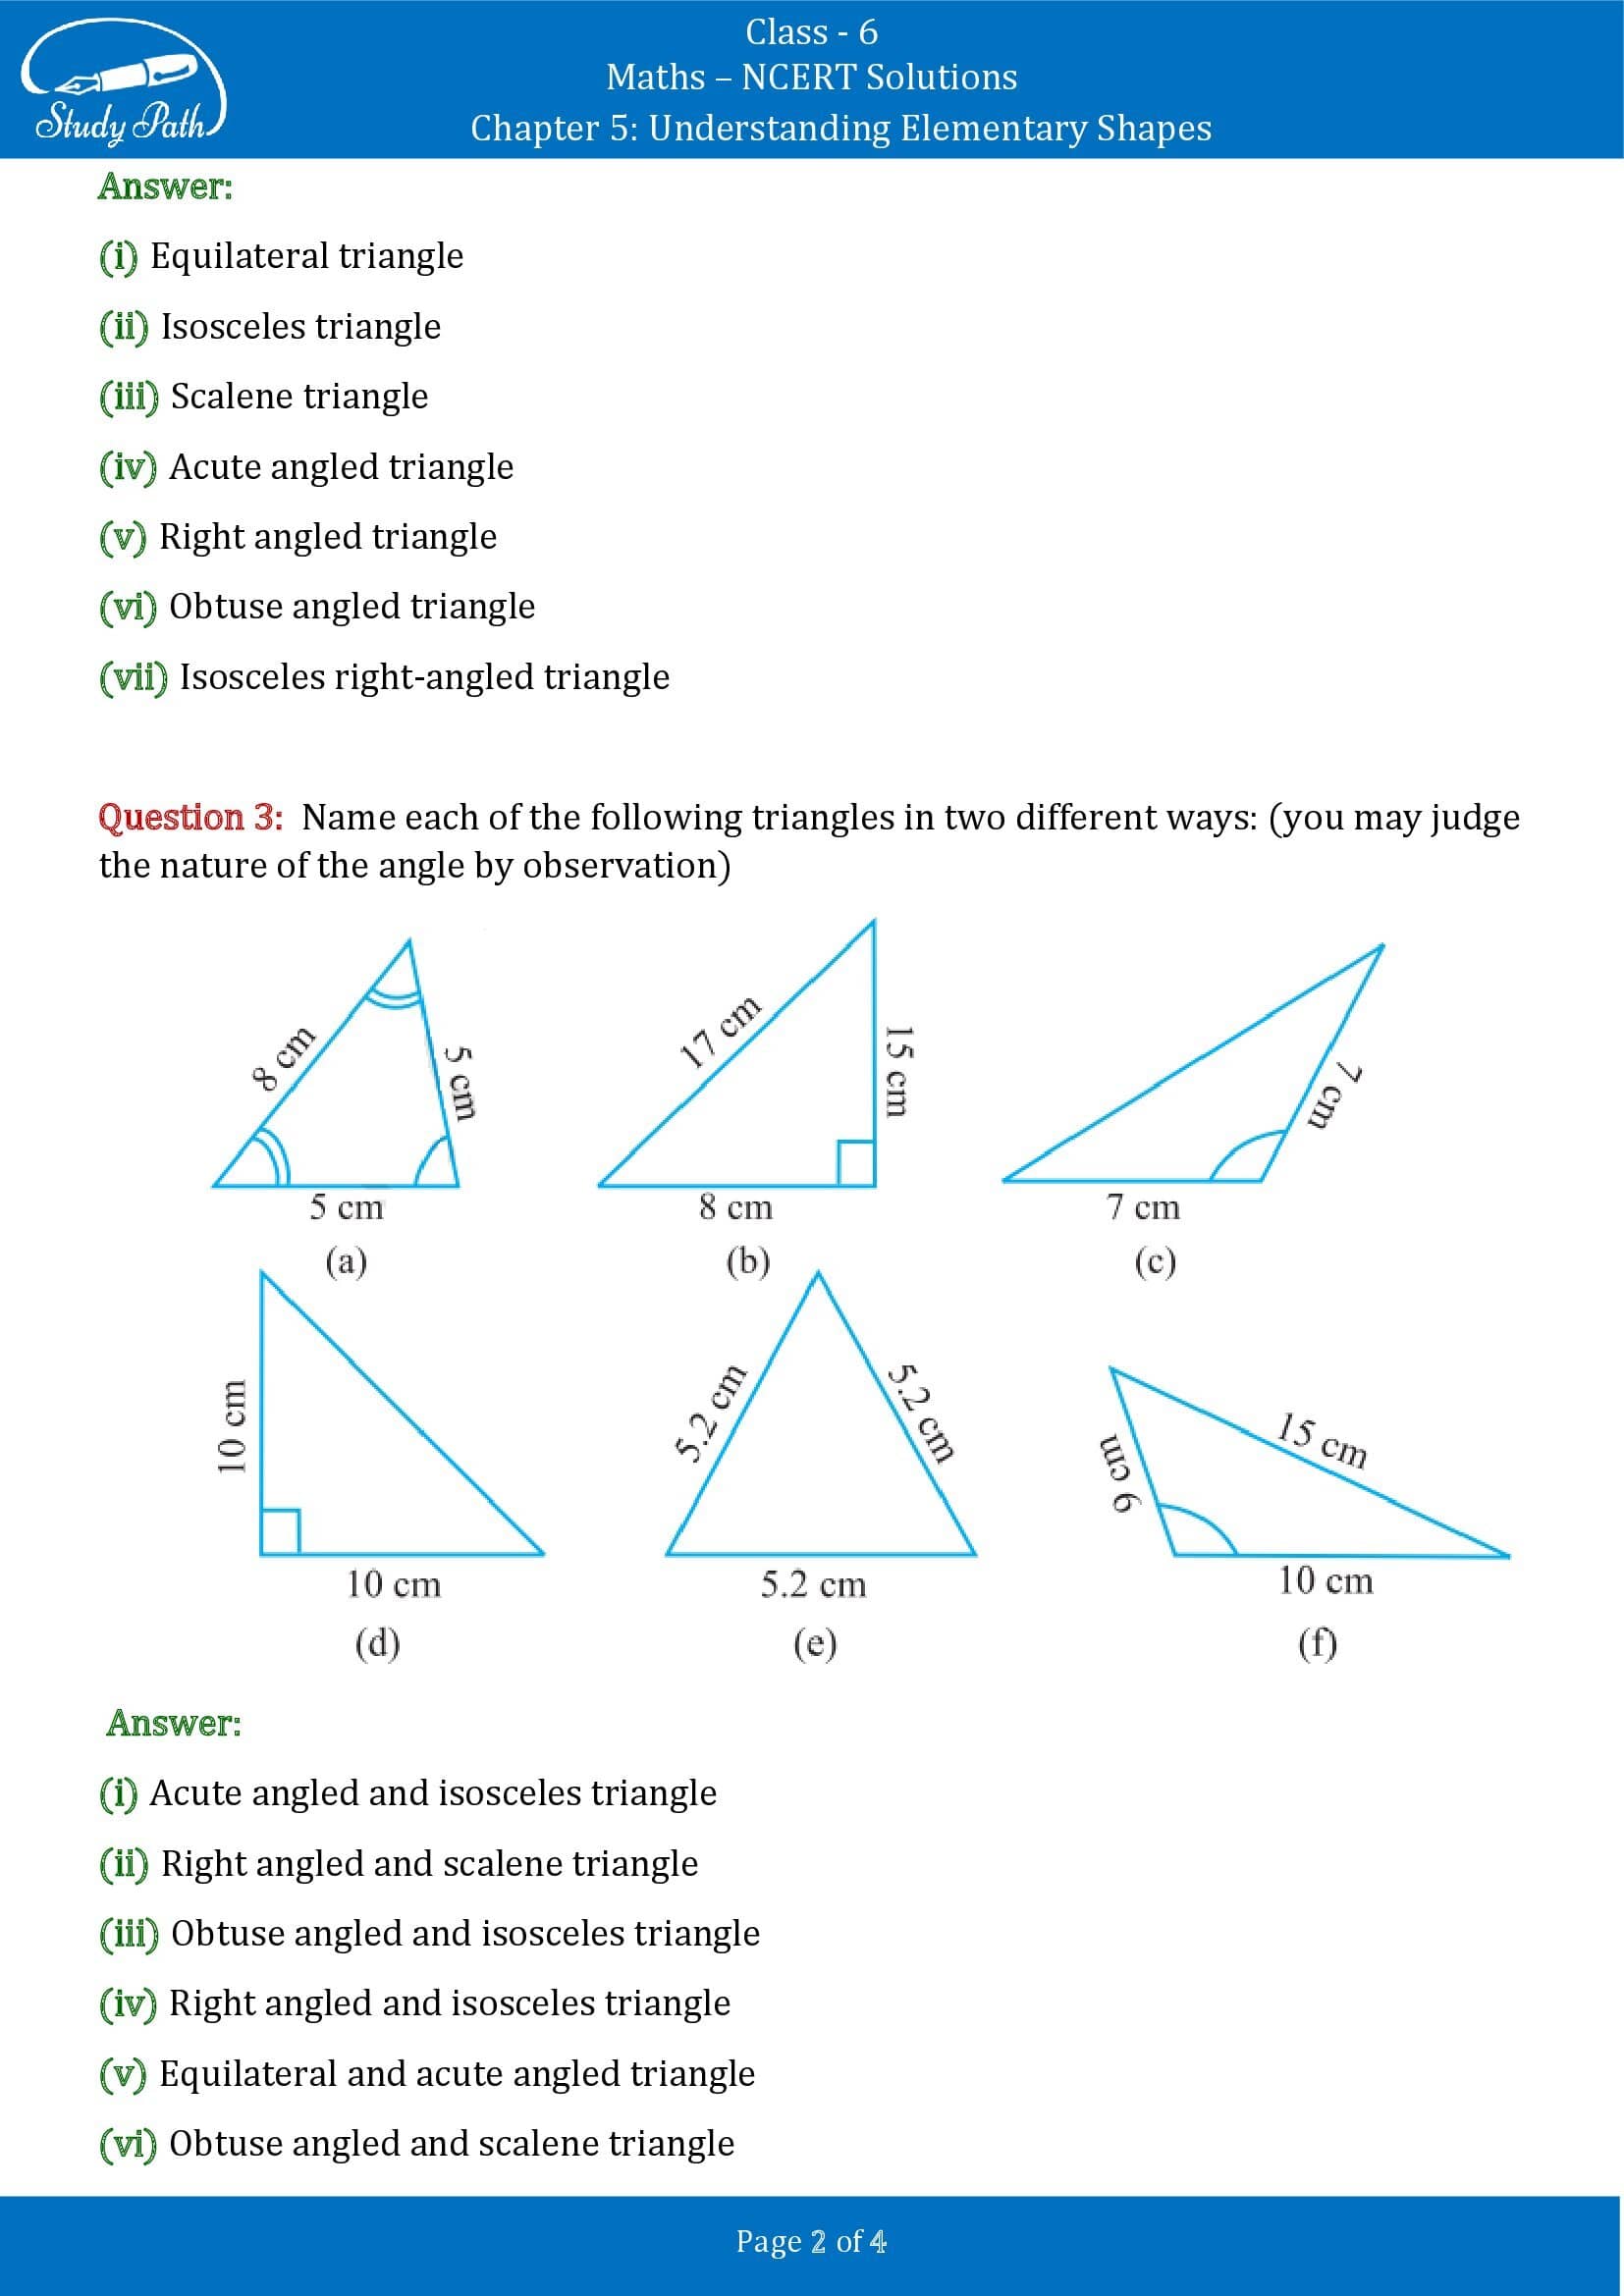 NCERT Solutions for Class 6 Maths Chapter 5 Understanding Elementary Shapes Exercise 5.6 00002